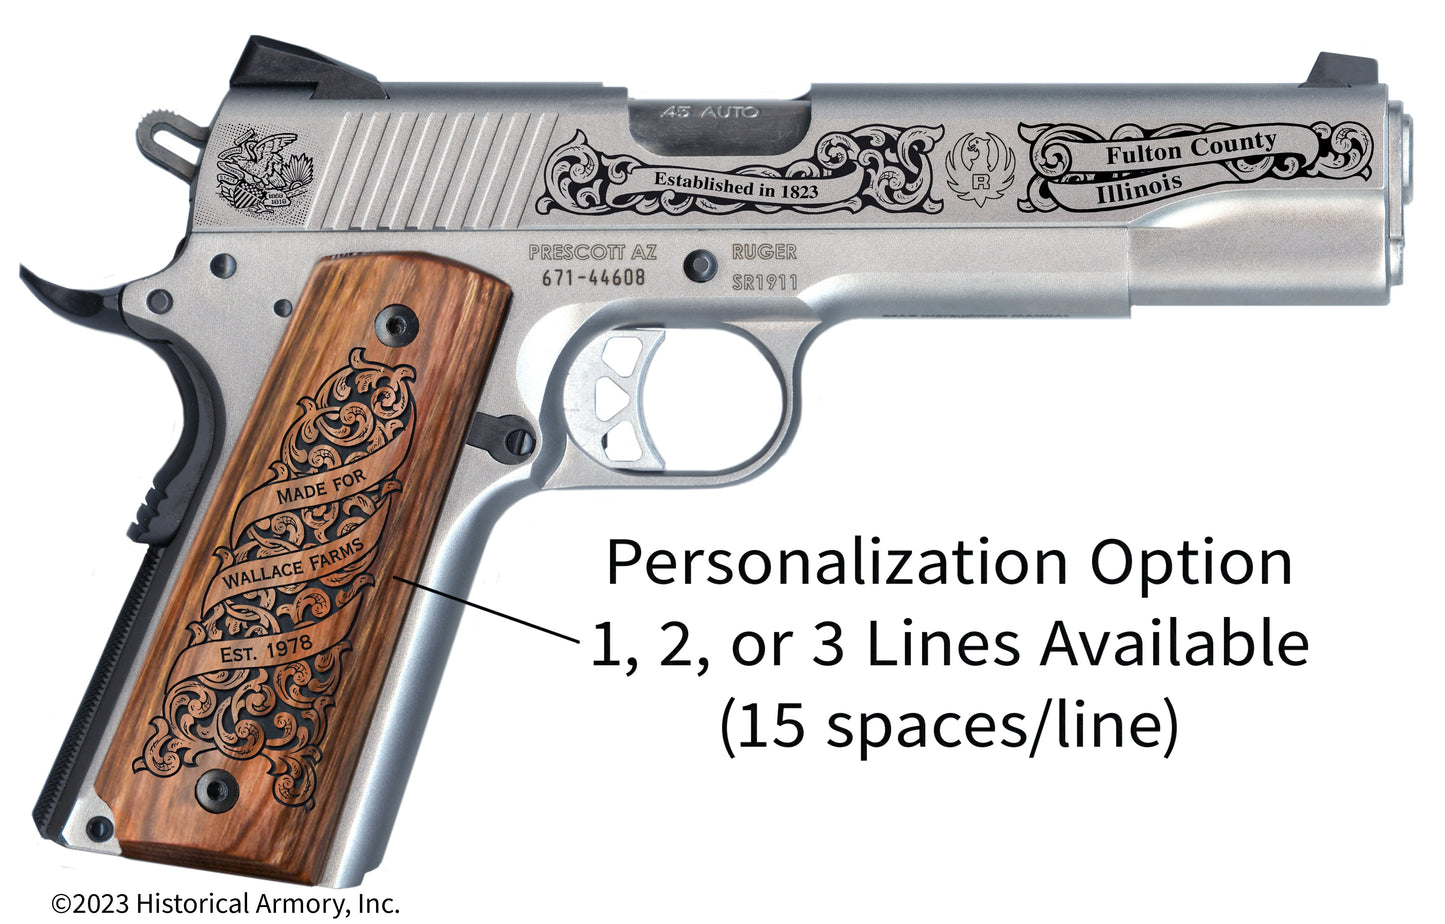 Fulton County Illinois Personalized Engraved .45 Auto Ruger 1911